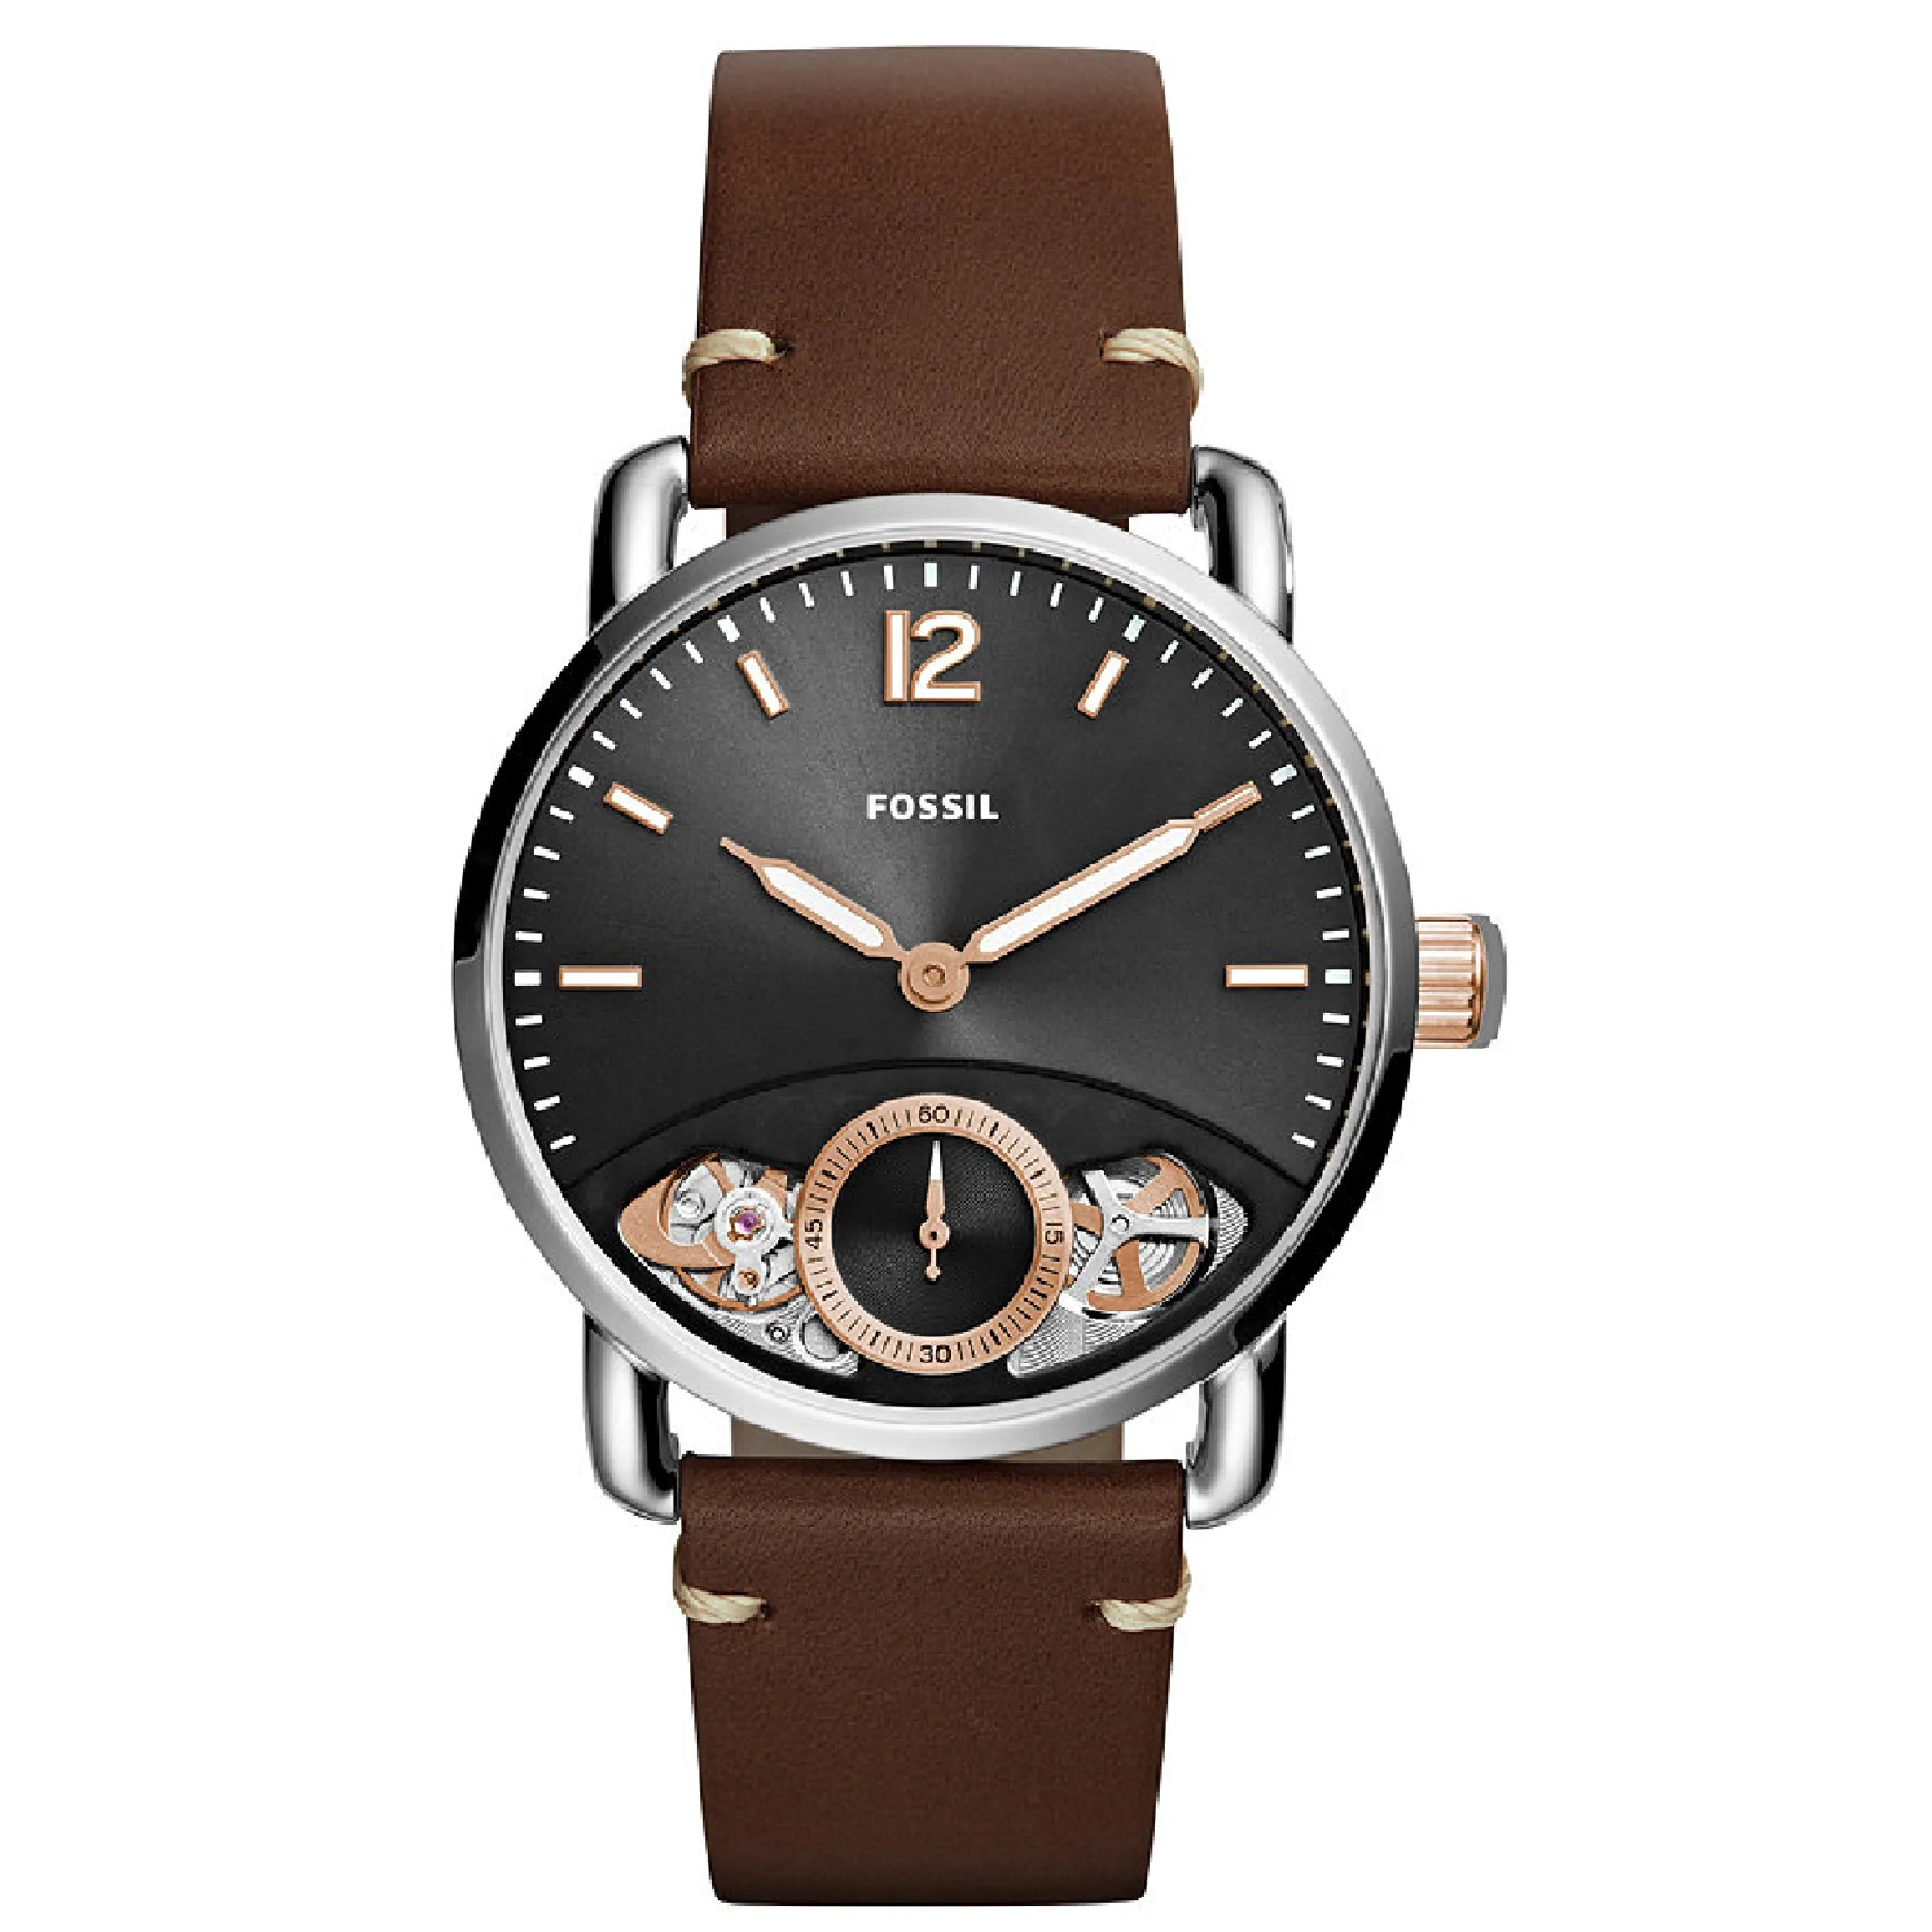 Fossil The Commuter Twist Brown Leather Watch ME1165